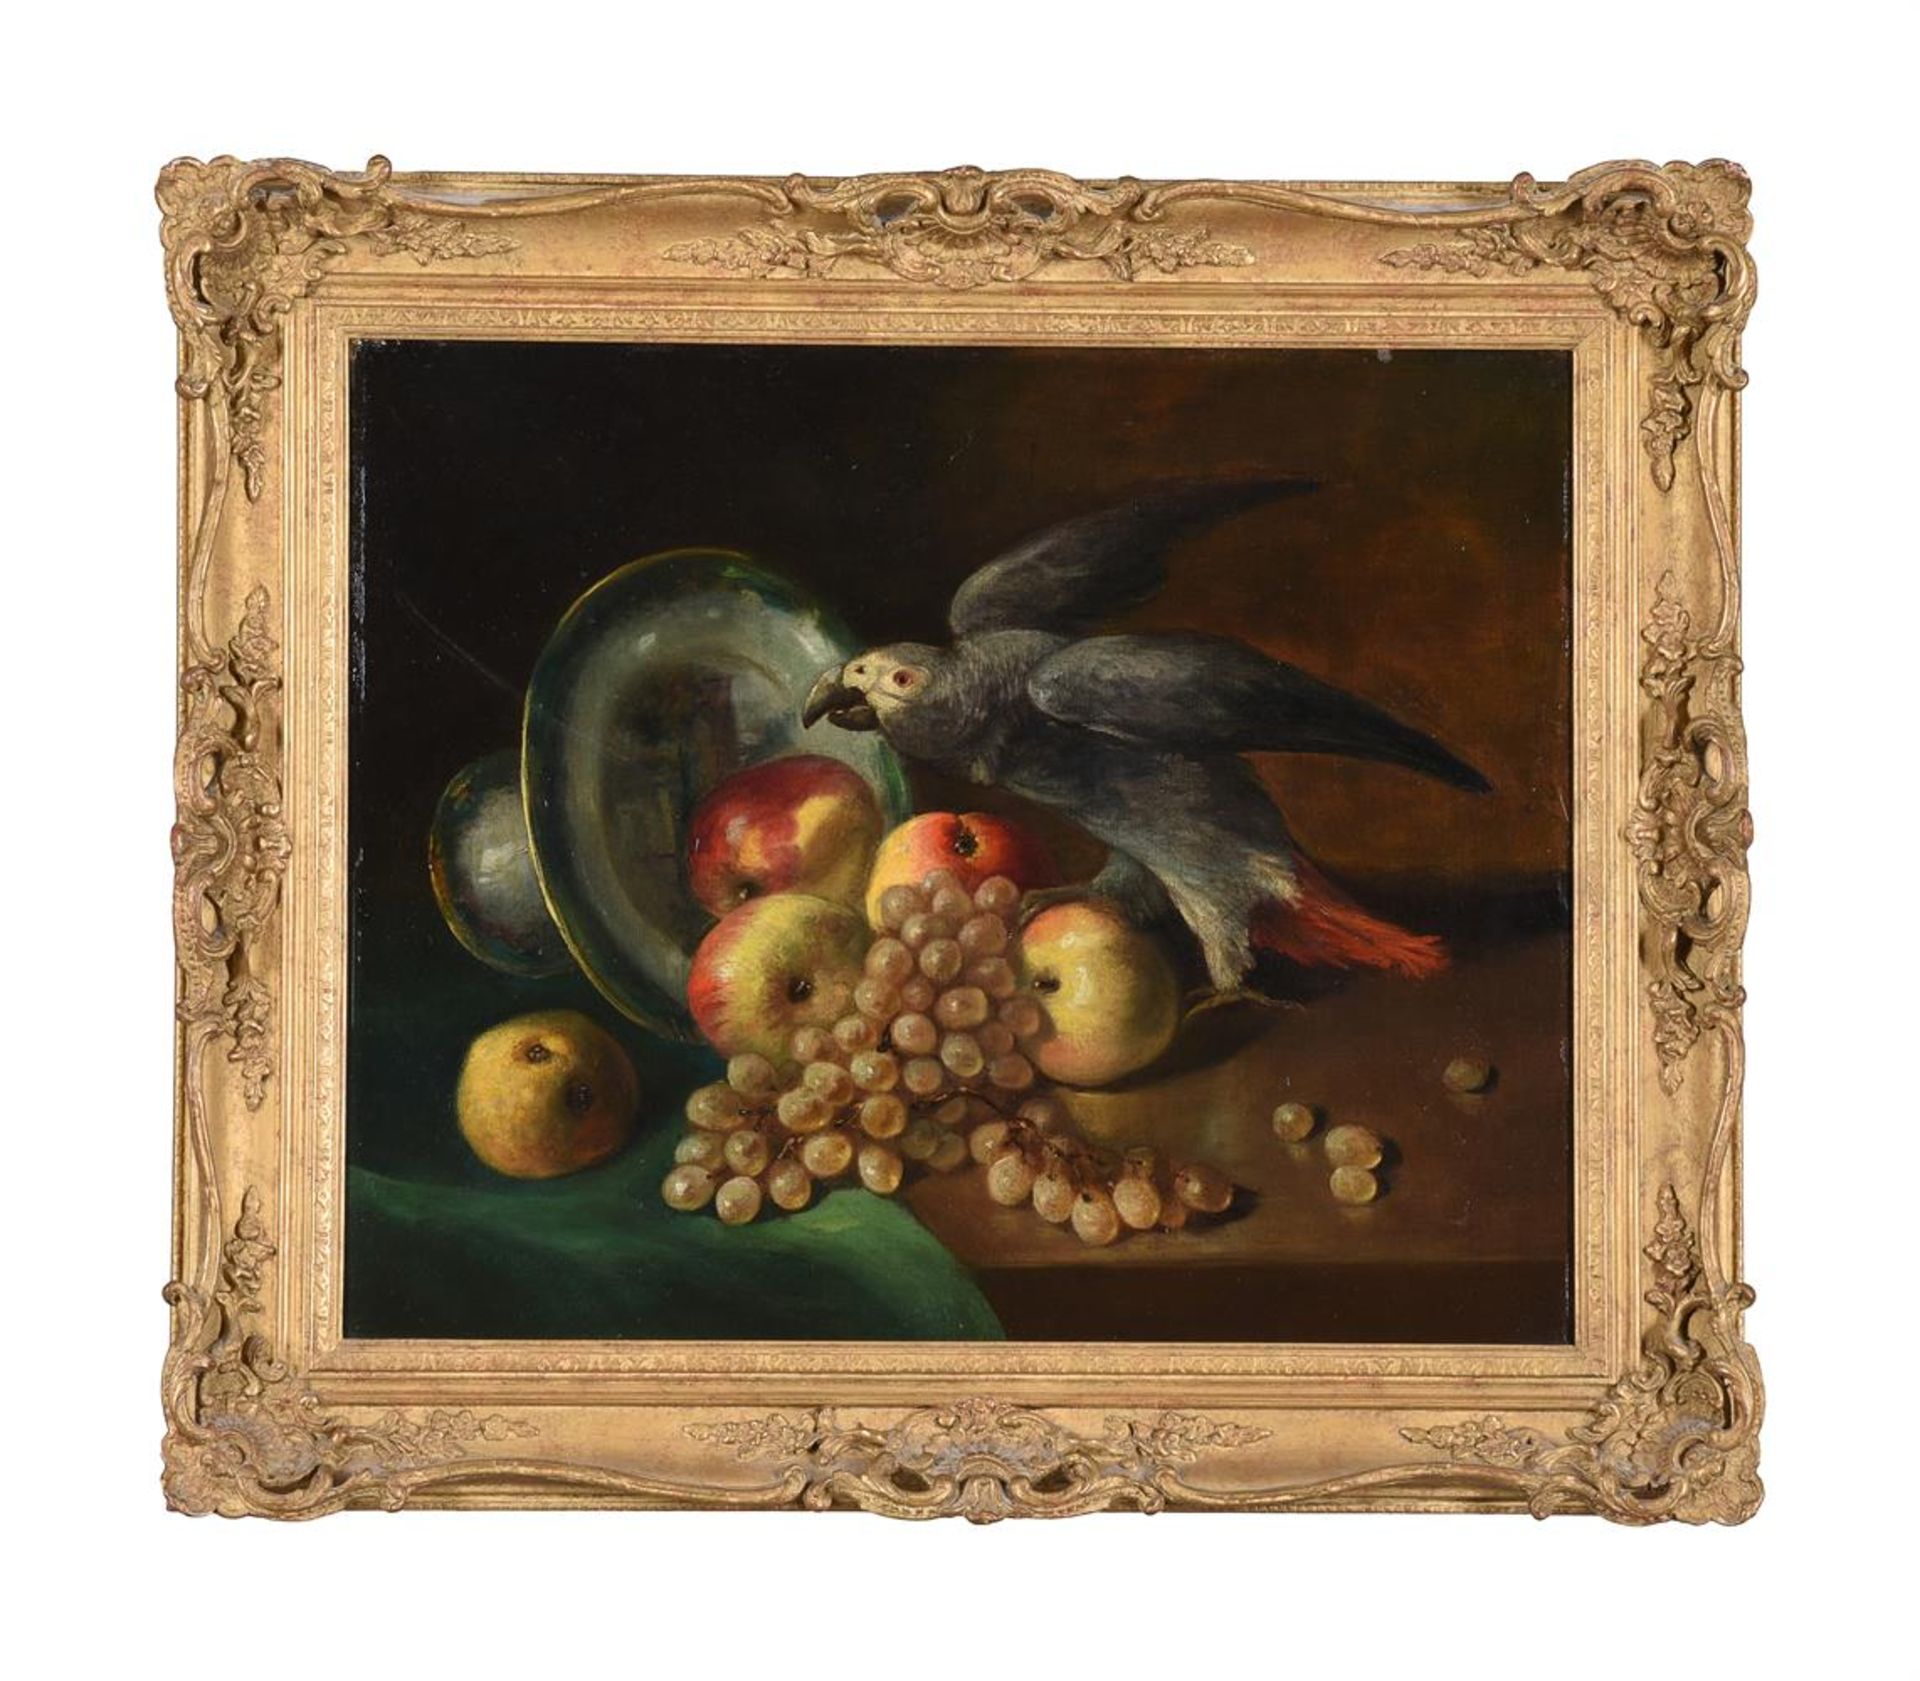 CONTINENTAL SCHOOL (19TH CENTURY), A PARROT STEALING FRUIT - Image 2 of 3